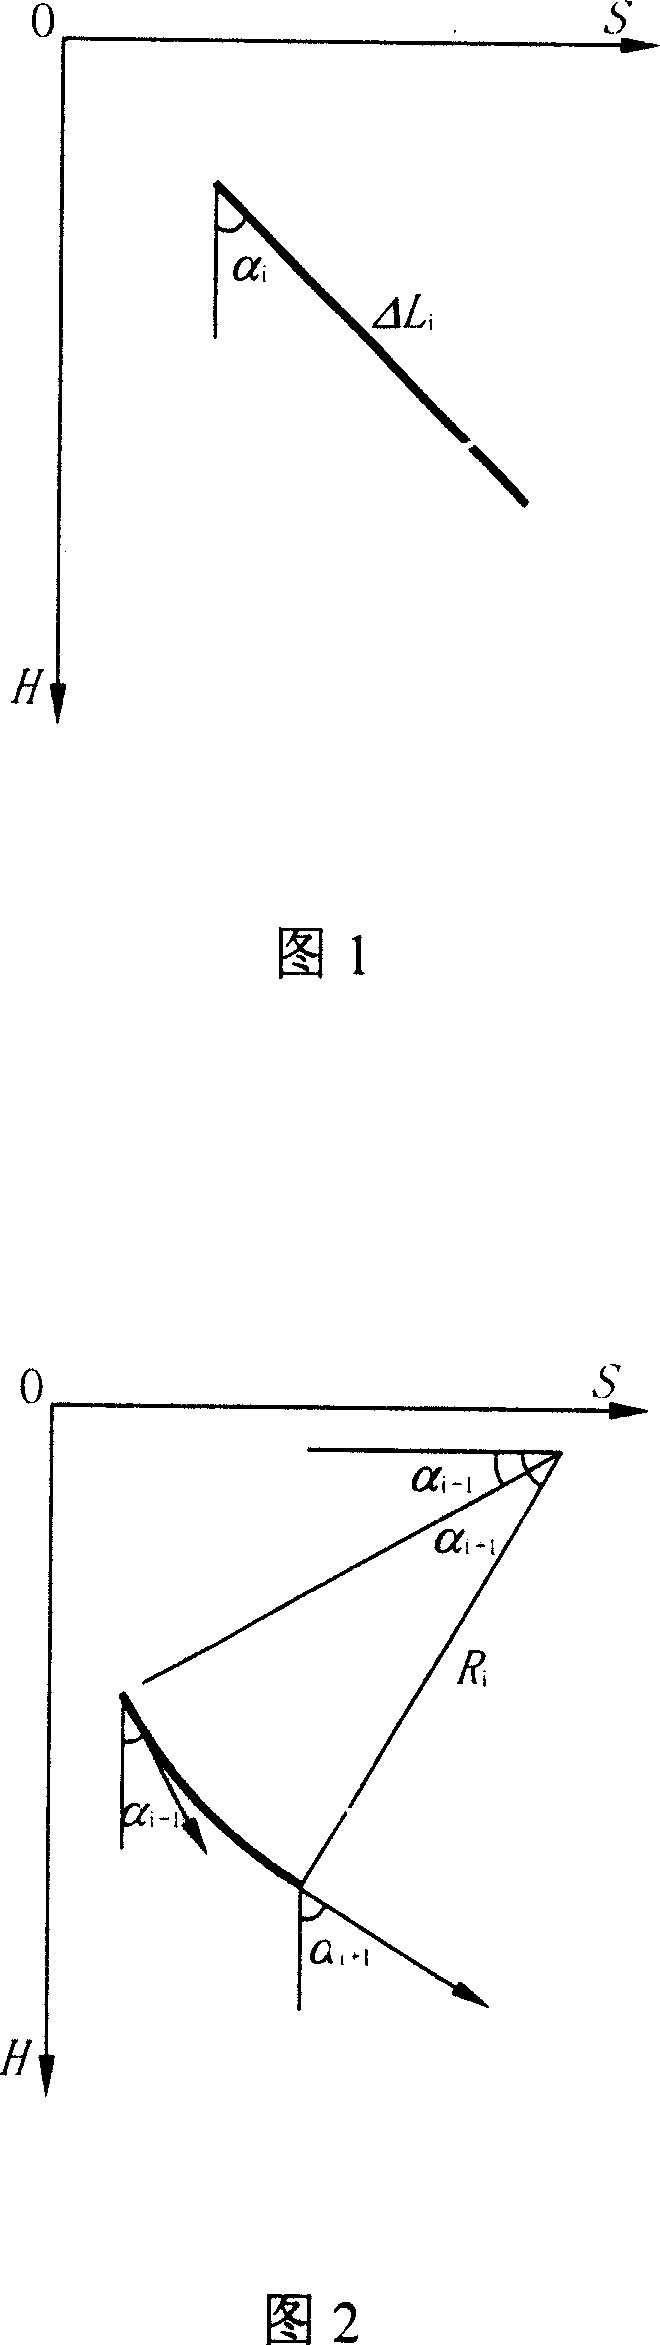 Method for designing well-drilling borehole track